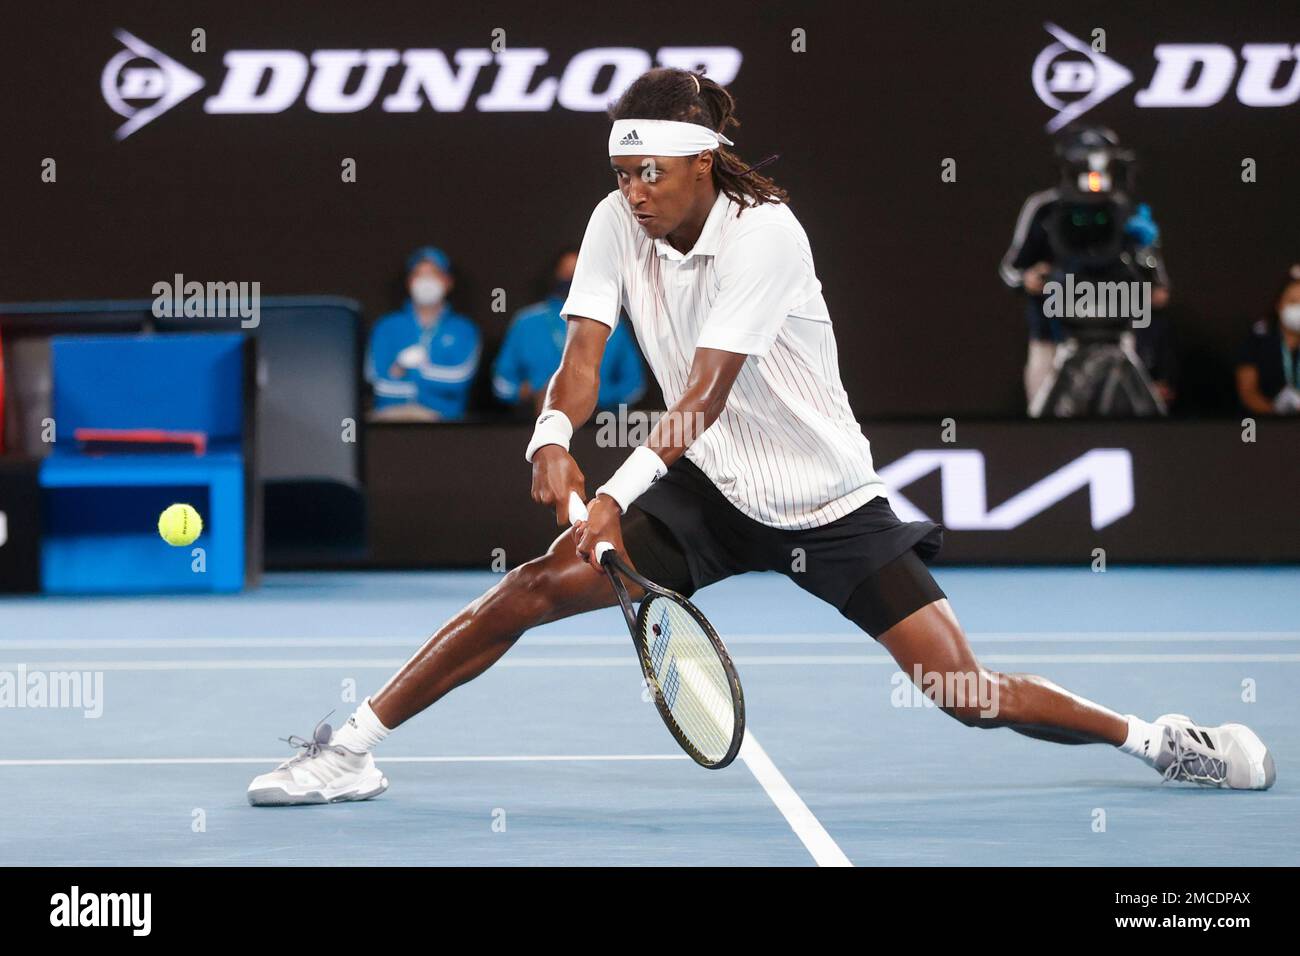 Mikael Ymer of Sweden plays a backhand return to Stefanos Tsitsipas of Greece during their first round match at the Australian Open tennis championships in Melbourne, Australia, Tuesday, Jan